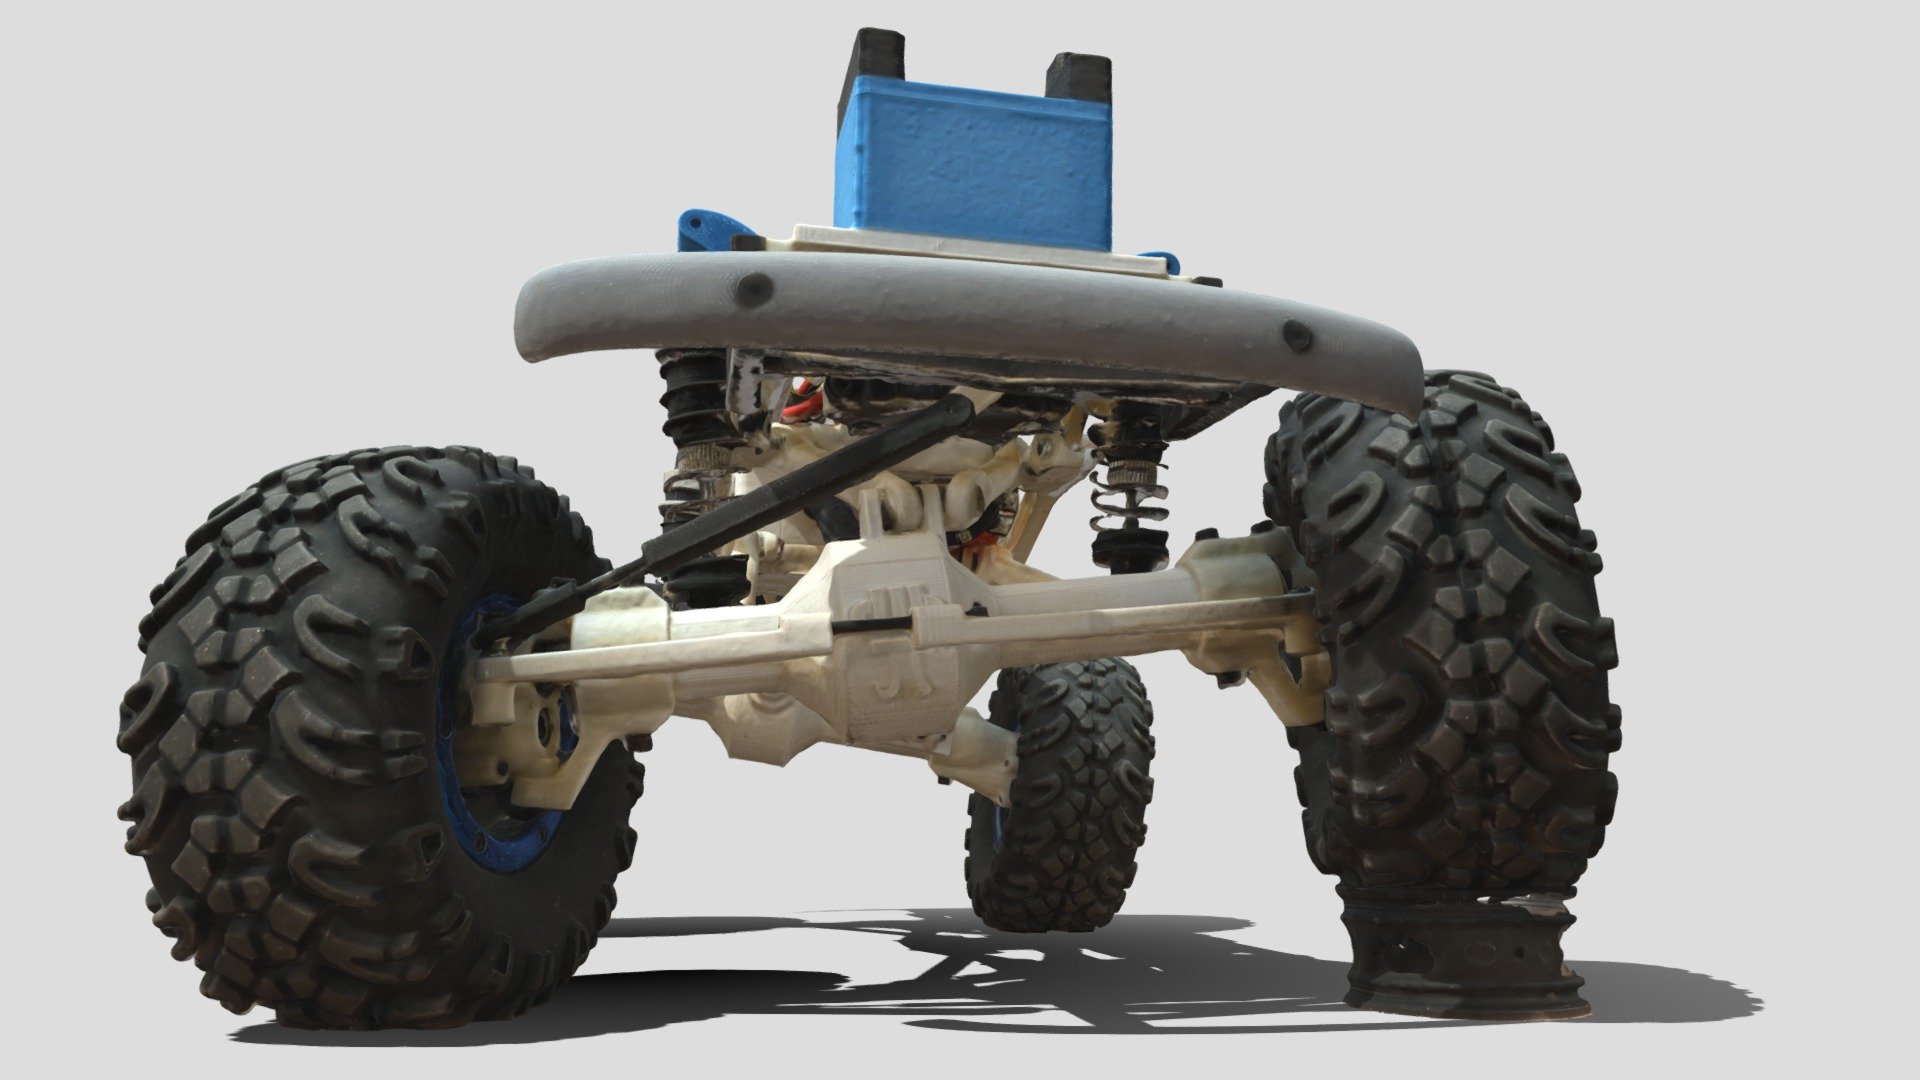 My last design, some Portal Axles for my RC Car MTC Chassis with Rigid Axles. The portal axles can be used in other designs too. The fun part of this axles is they give the 1/10 scale crawler 13mm extra clearance with floor, making it easier to overcome some obstacles.
They use M1 gears inside each wheelhub and the rear axle can be fully 3D printing, I mean using no dogbones or CVDs, but working differentials if you want.

Locking the Front/Rear diffs makes crawling much easier, but driving a lot worse&hellip; If you want to give it a try, you will find it first in my MyMiniFactory Store! - MyRCCar MTC Portal Axles for 1/10 RC Crawler Car - 3D model by dlb5 3d model